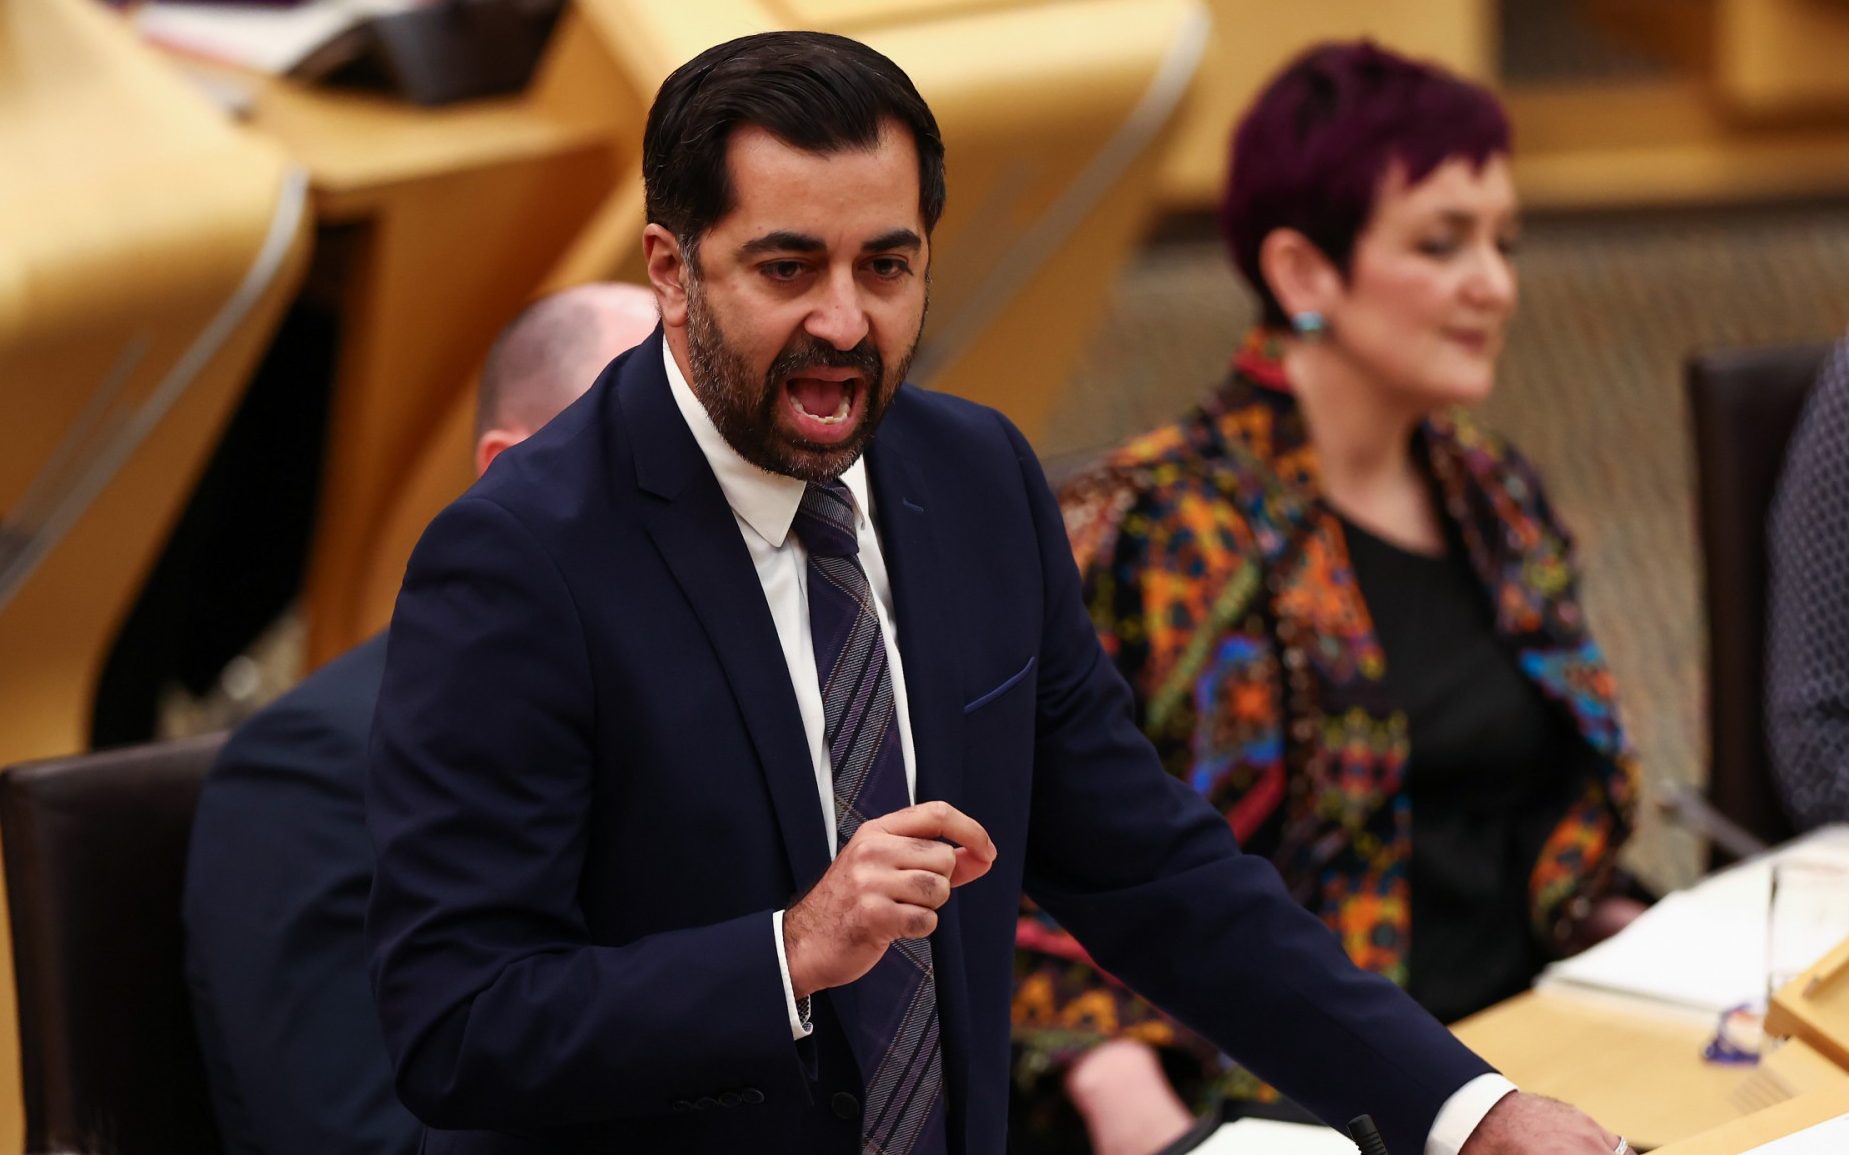 jk rowling accuses humza yousaf of showing ‘contempt for women’